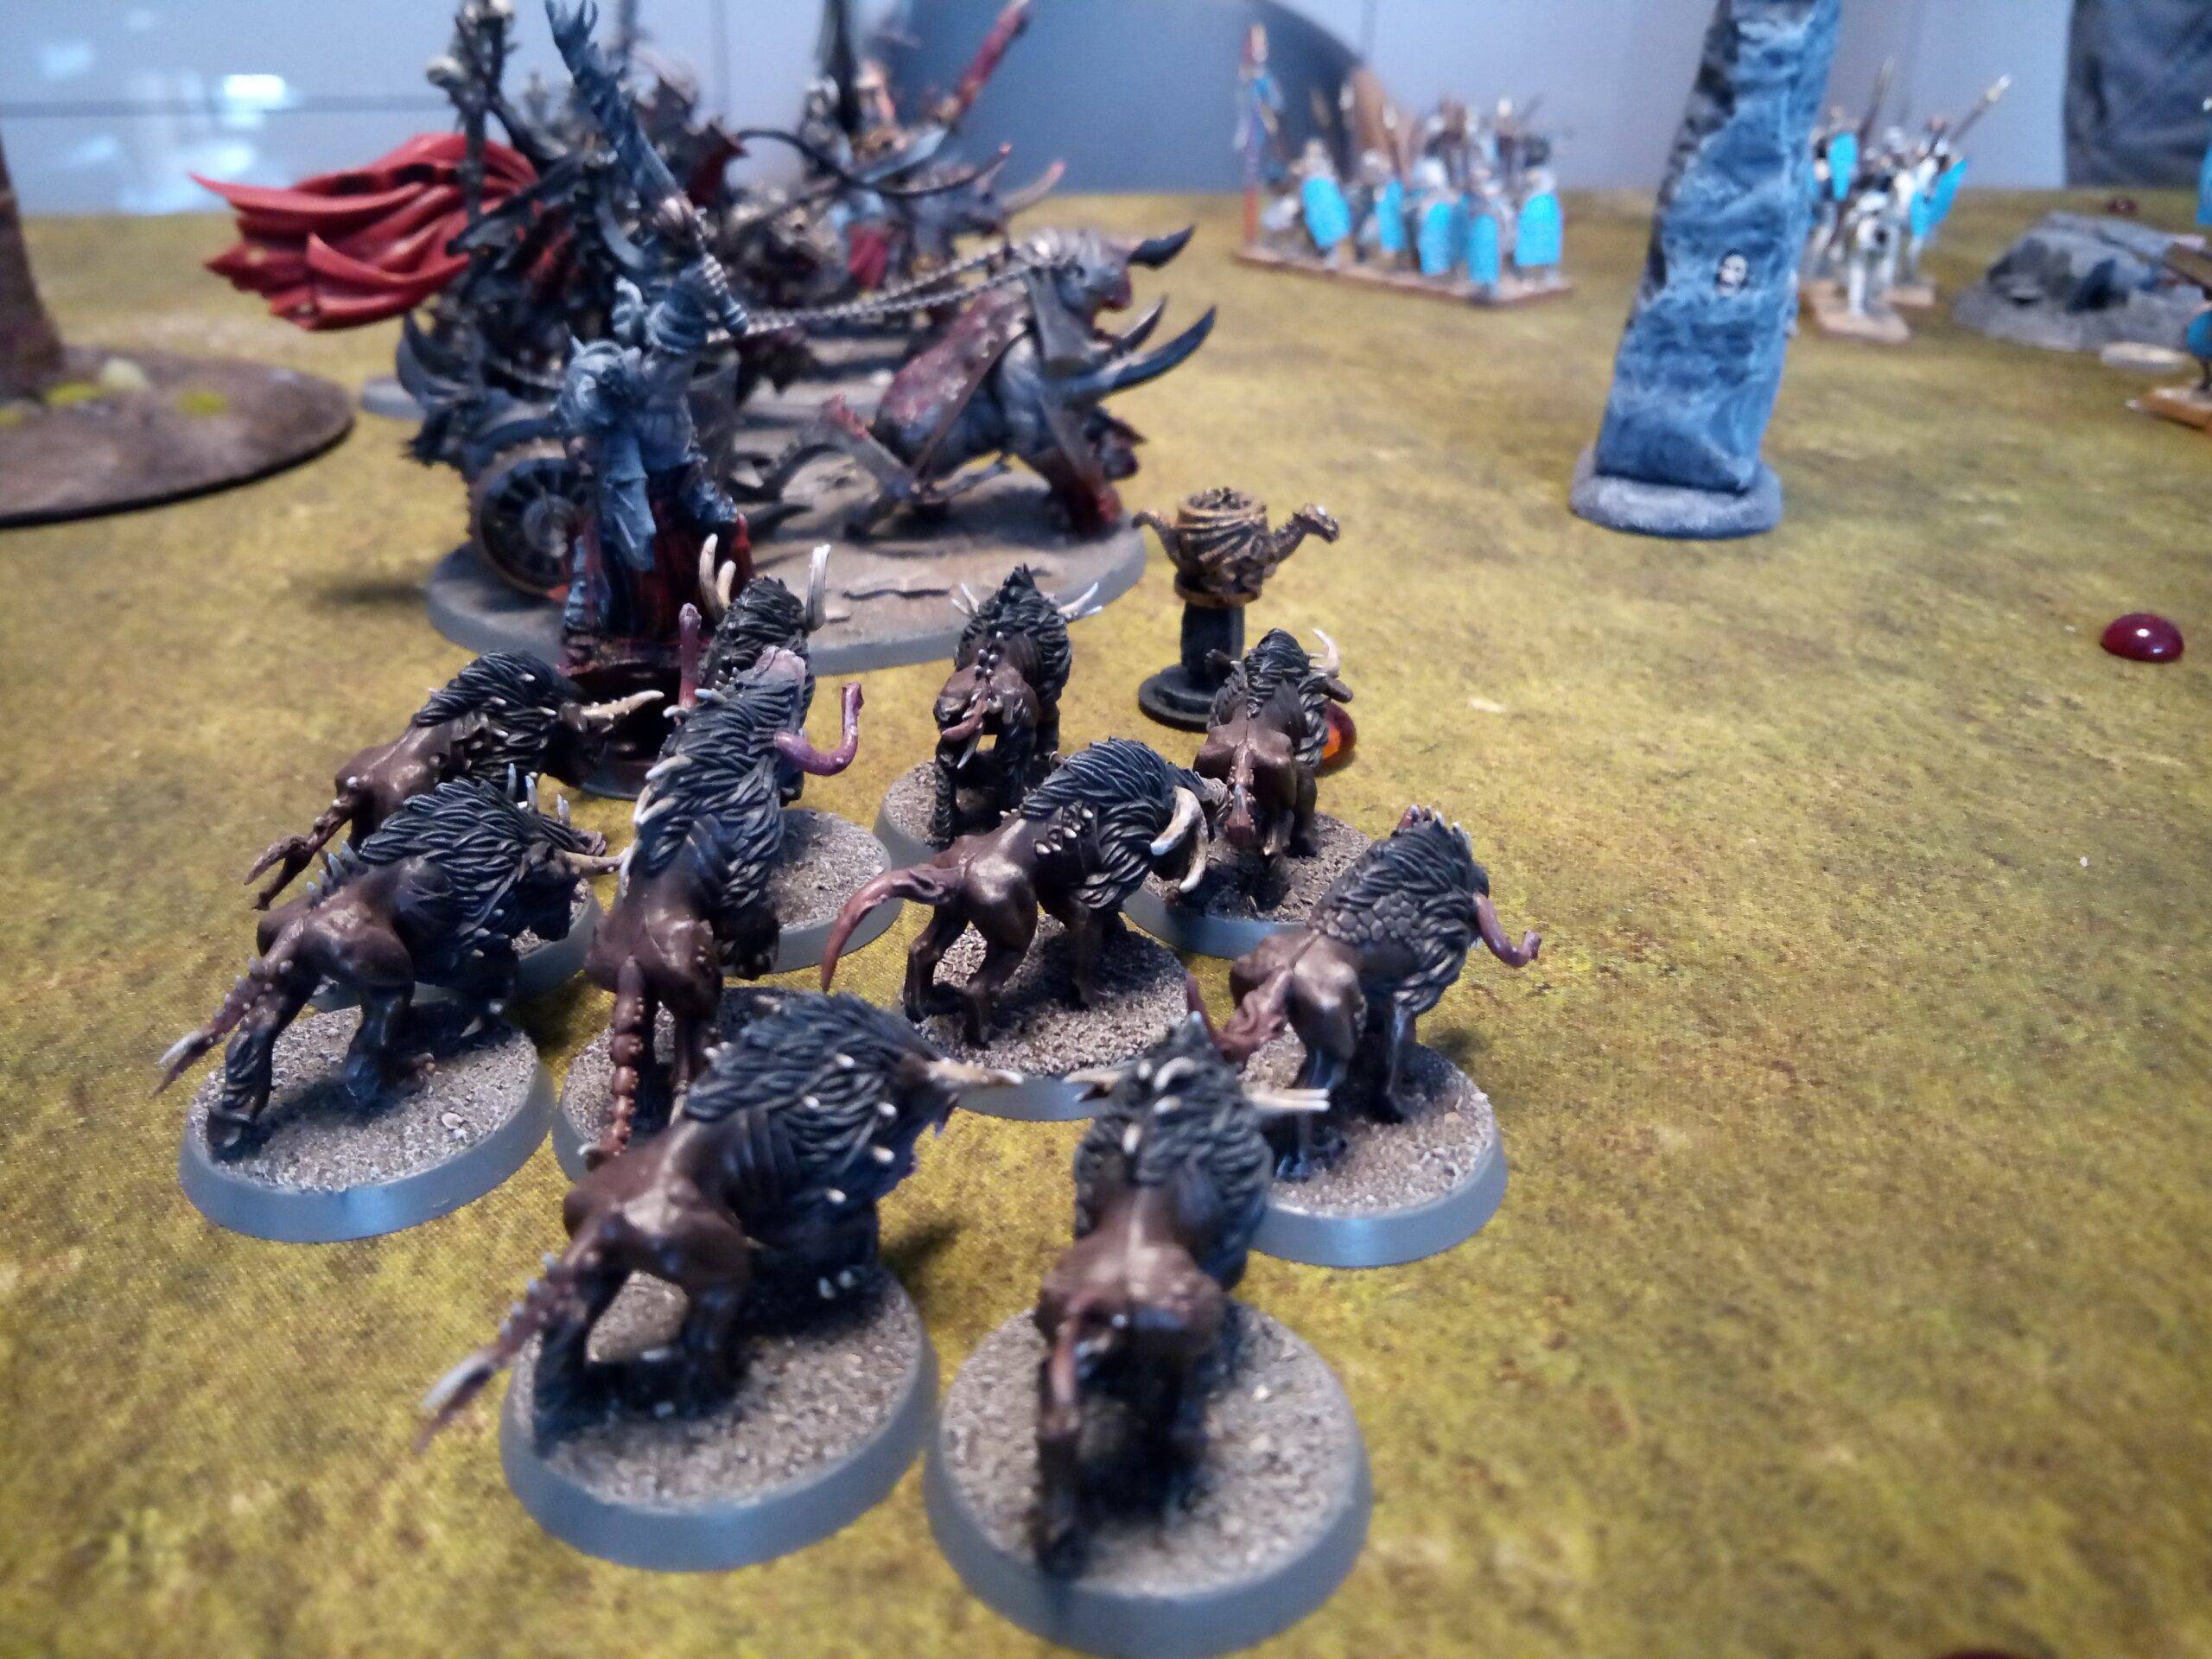 Havoc hounds charging into battle in this game of One Page Rules Age of Fantasy.